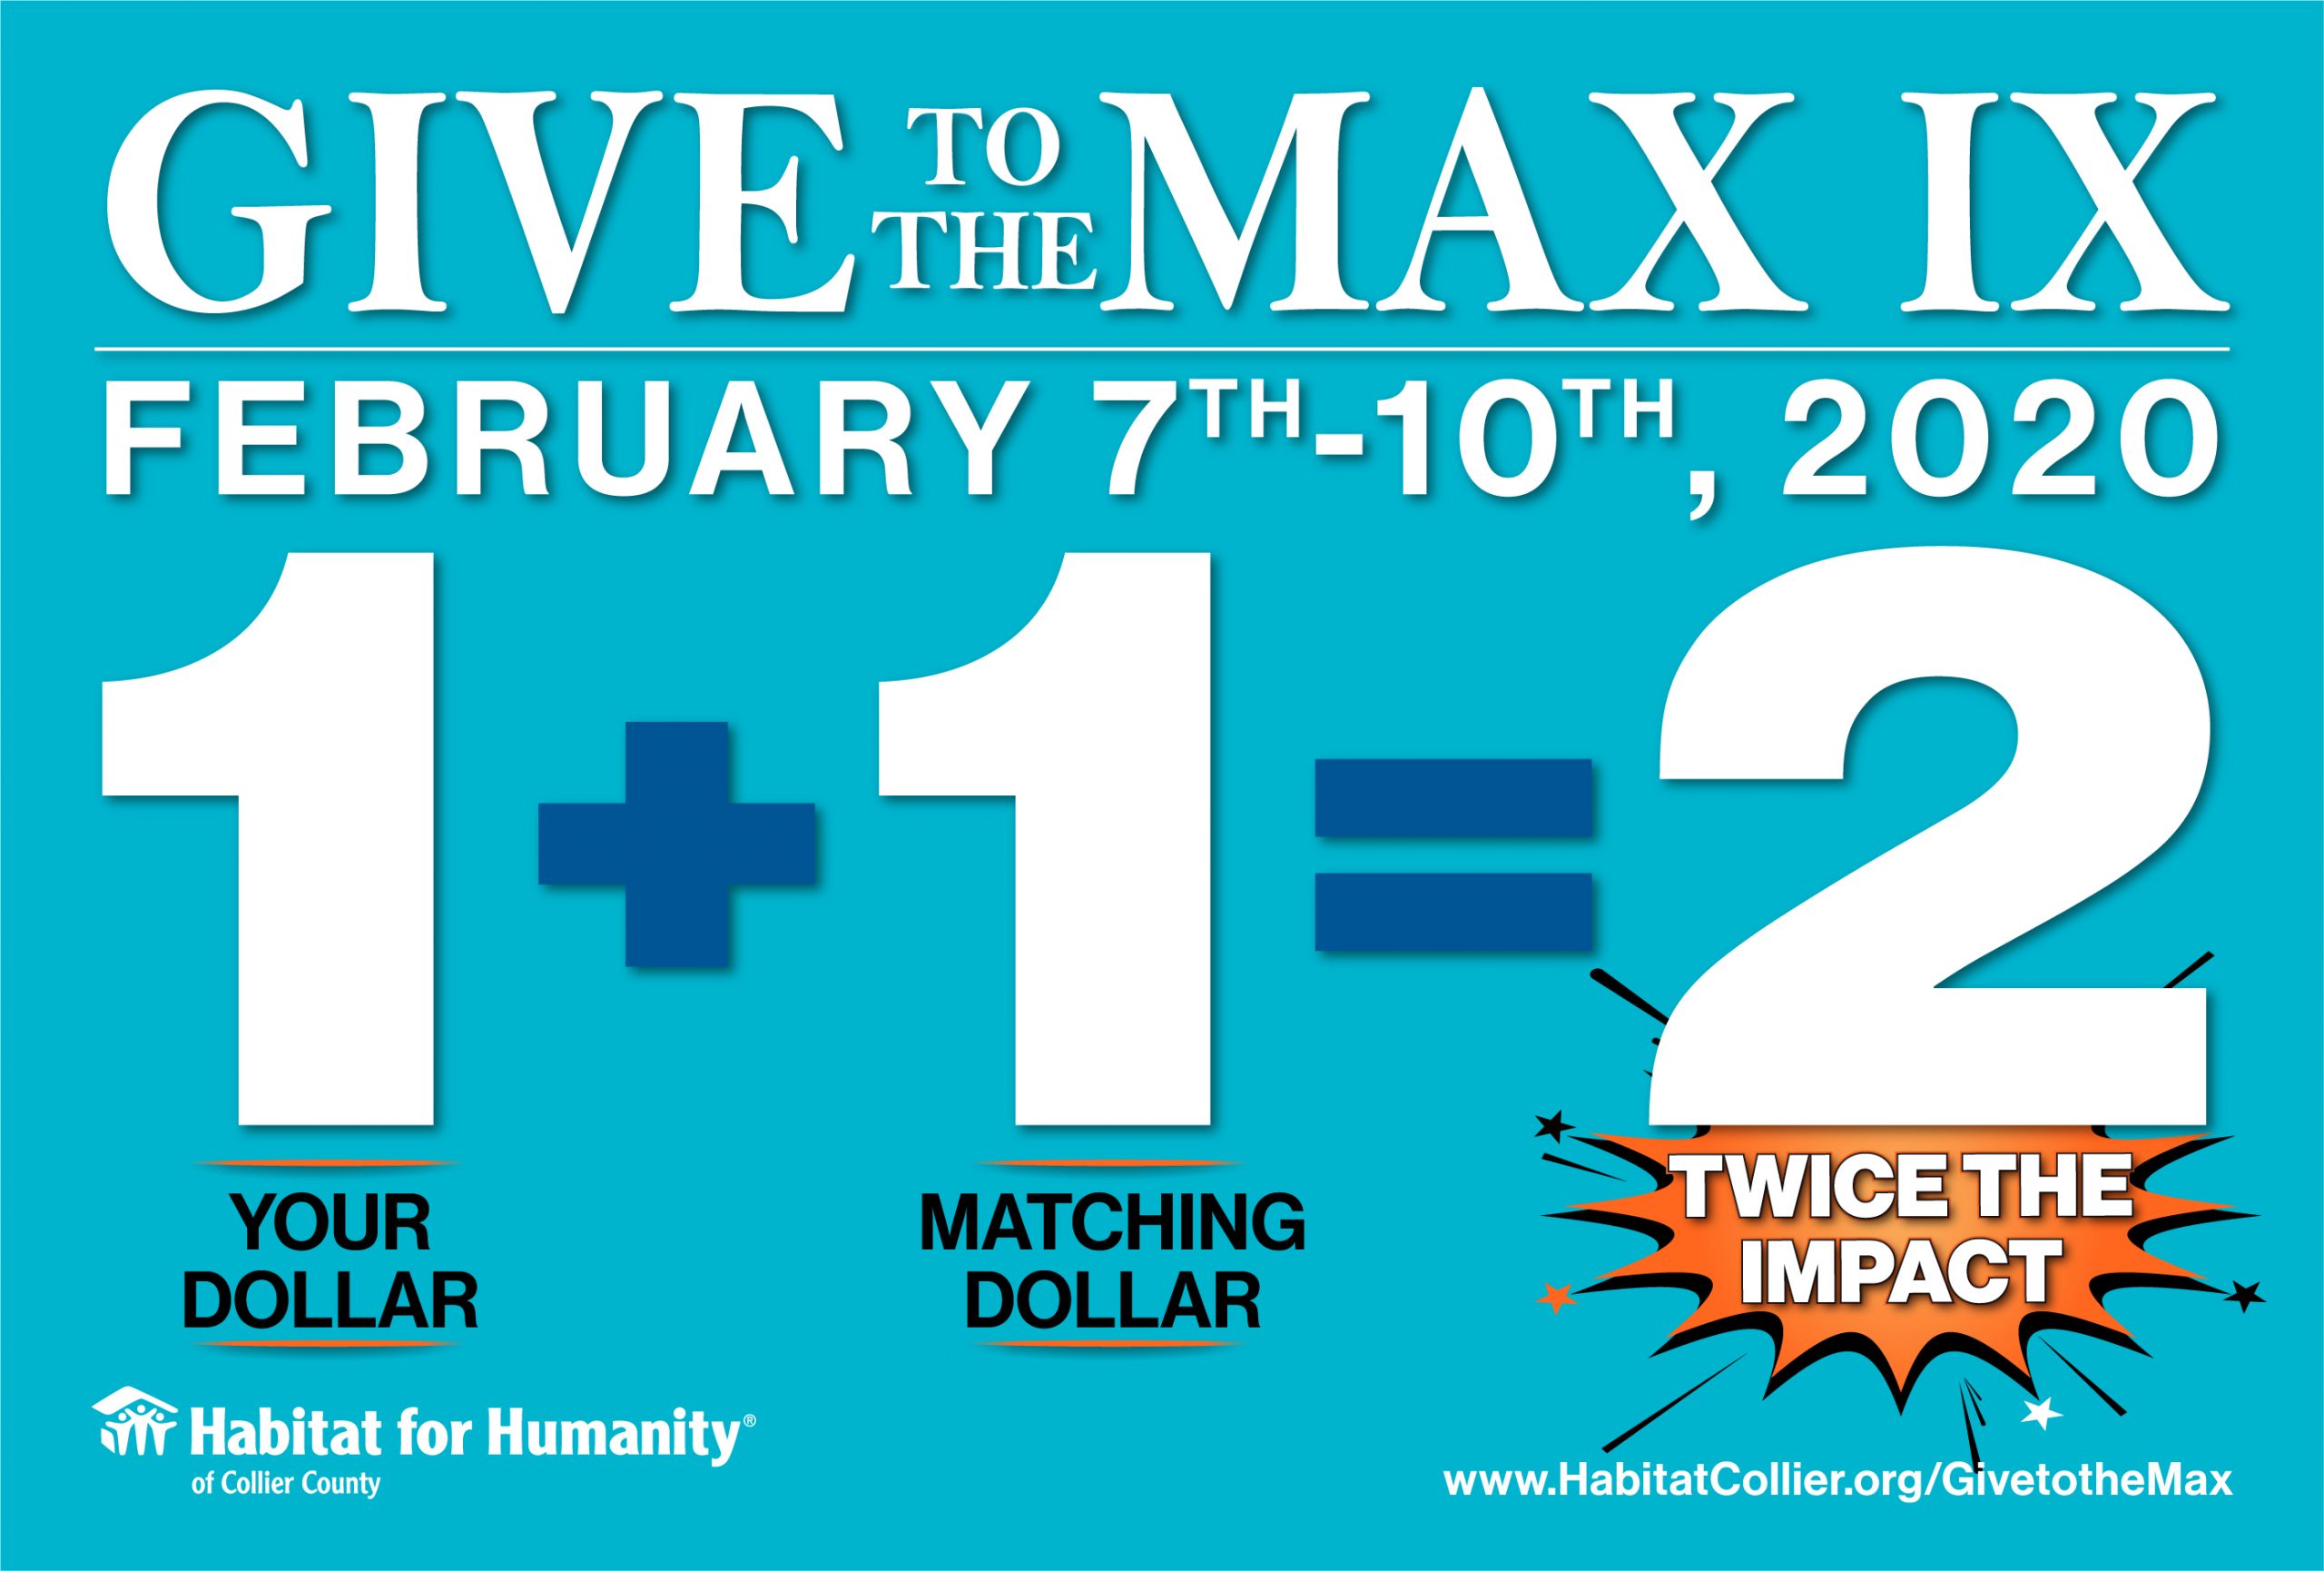 Give to the Max IX - Logo - https://s41078.pcdn.co/wp-content/uploads/2020/08/Fundraising_Habitat-for-Humanity-scaled.jpg